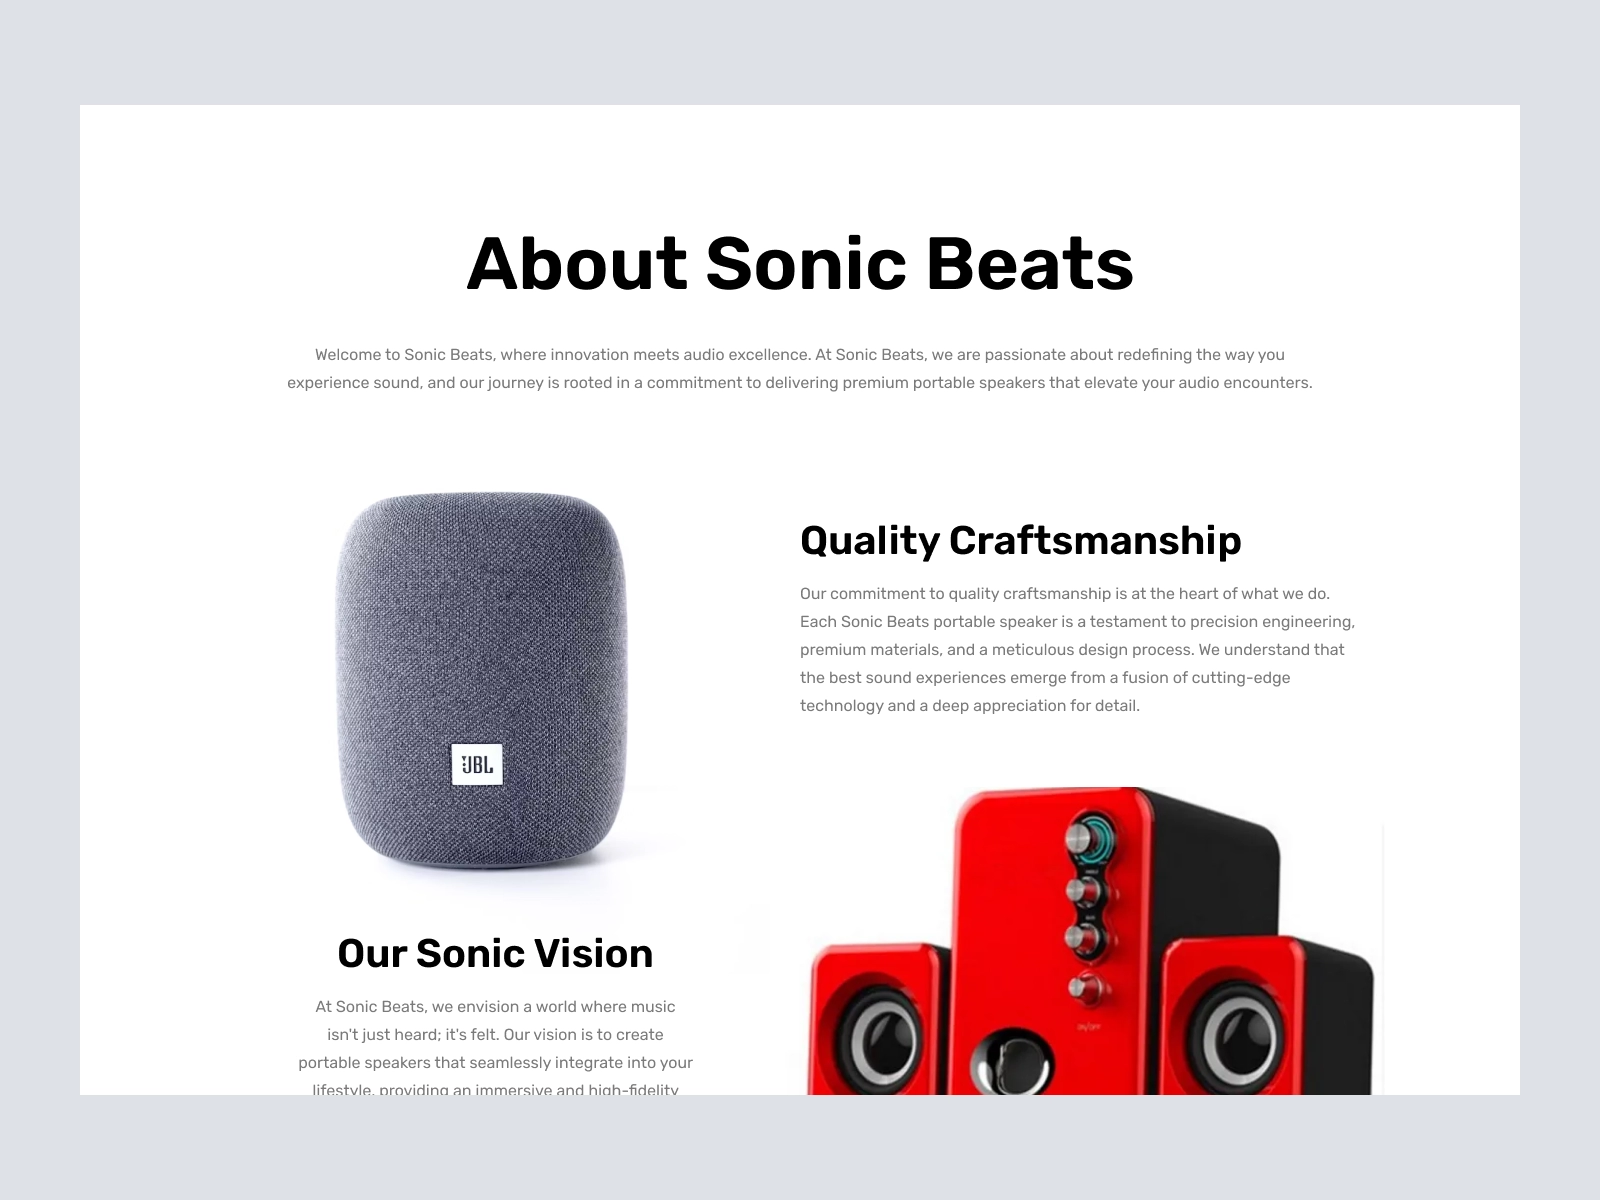 SonicBeats - Bluetooth Speakers and Radio Shopify Store for Figma and Adobe XD - screen 3